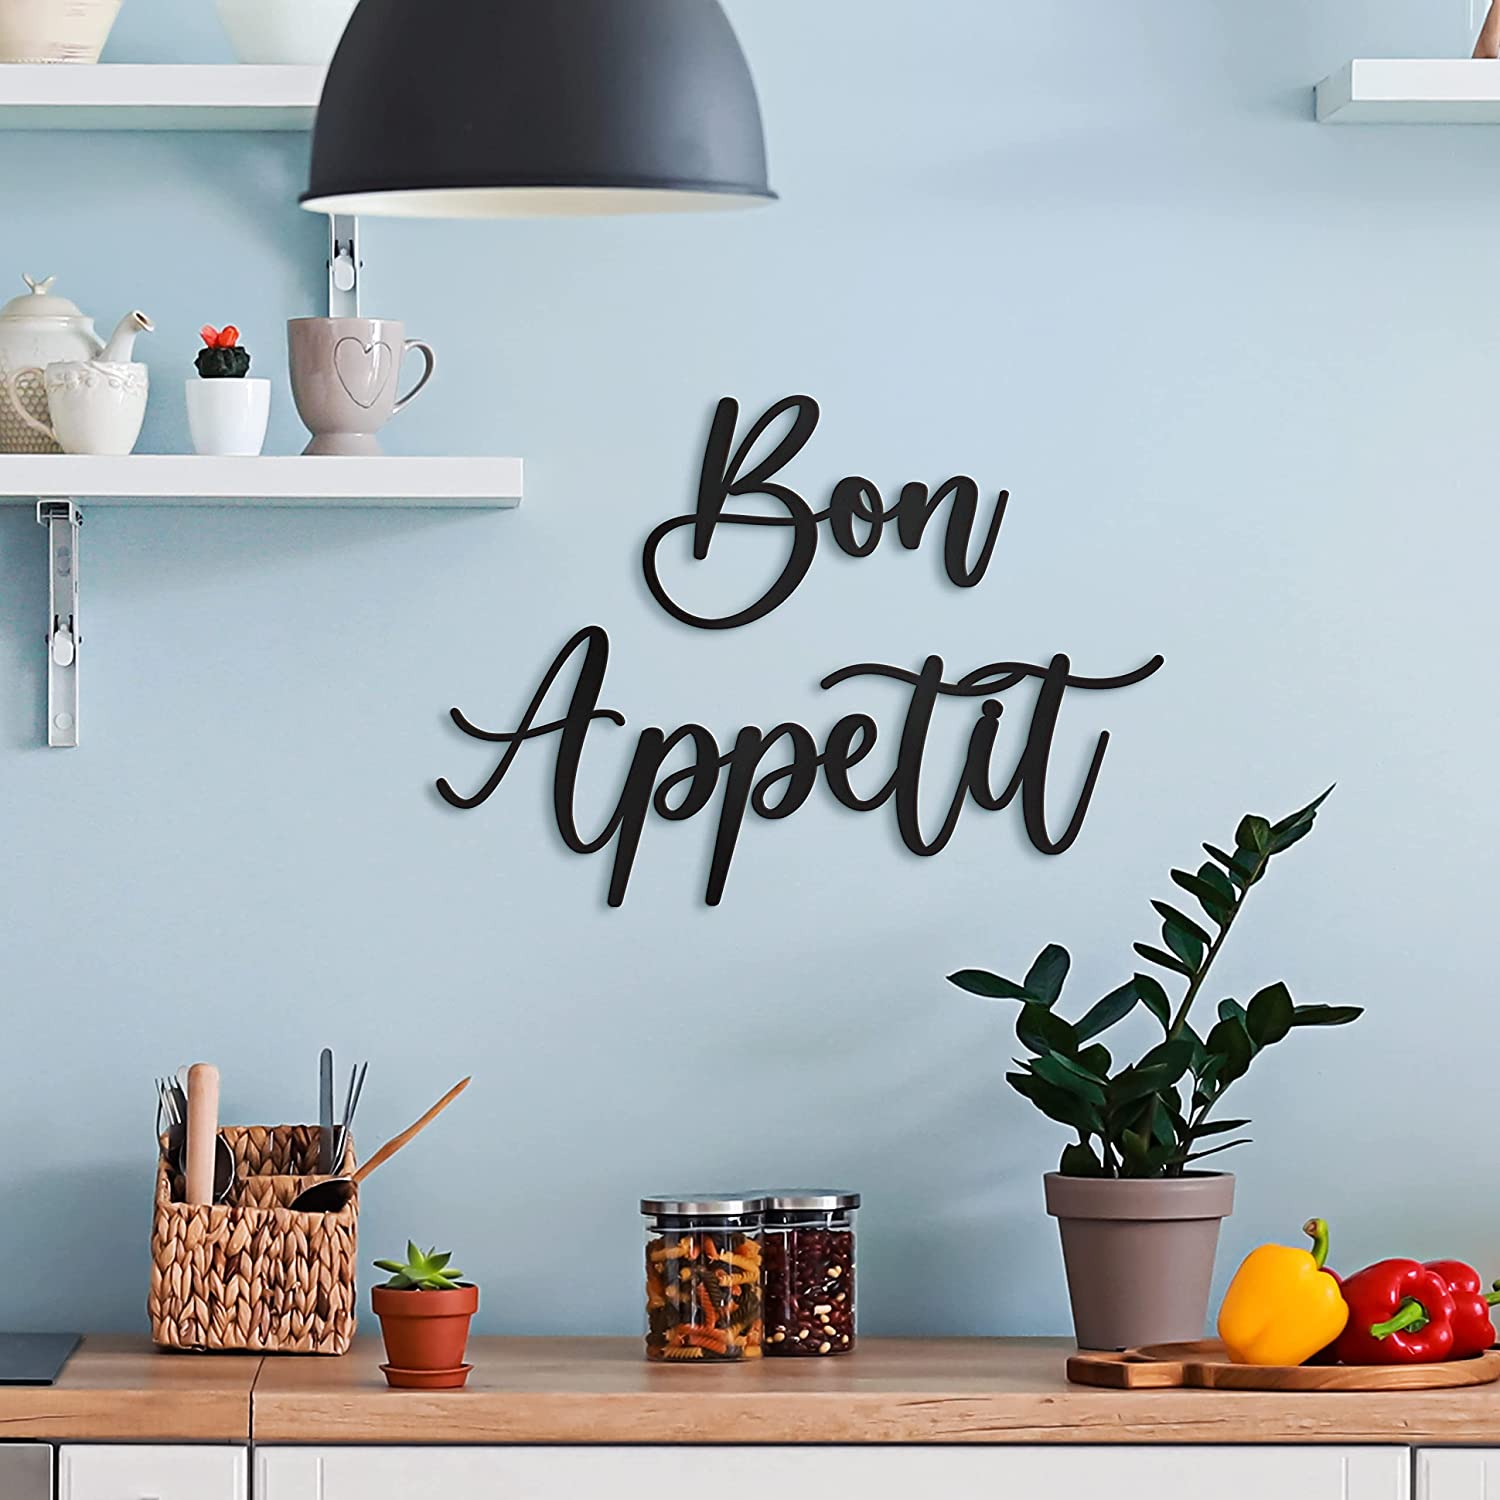 Bon Appetit Metal Wall Decor - 17"X12" and 17"x 14"Black Farmhouse Modern Cute large Bon Appetit Metal Wall Art For Hanging kitchen signs wall decor